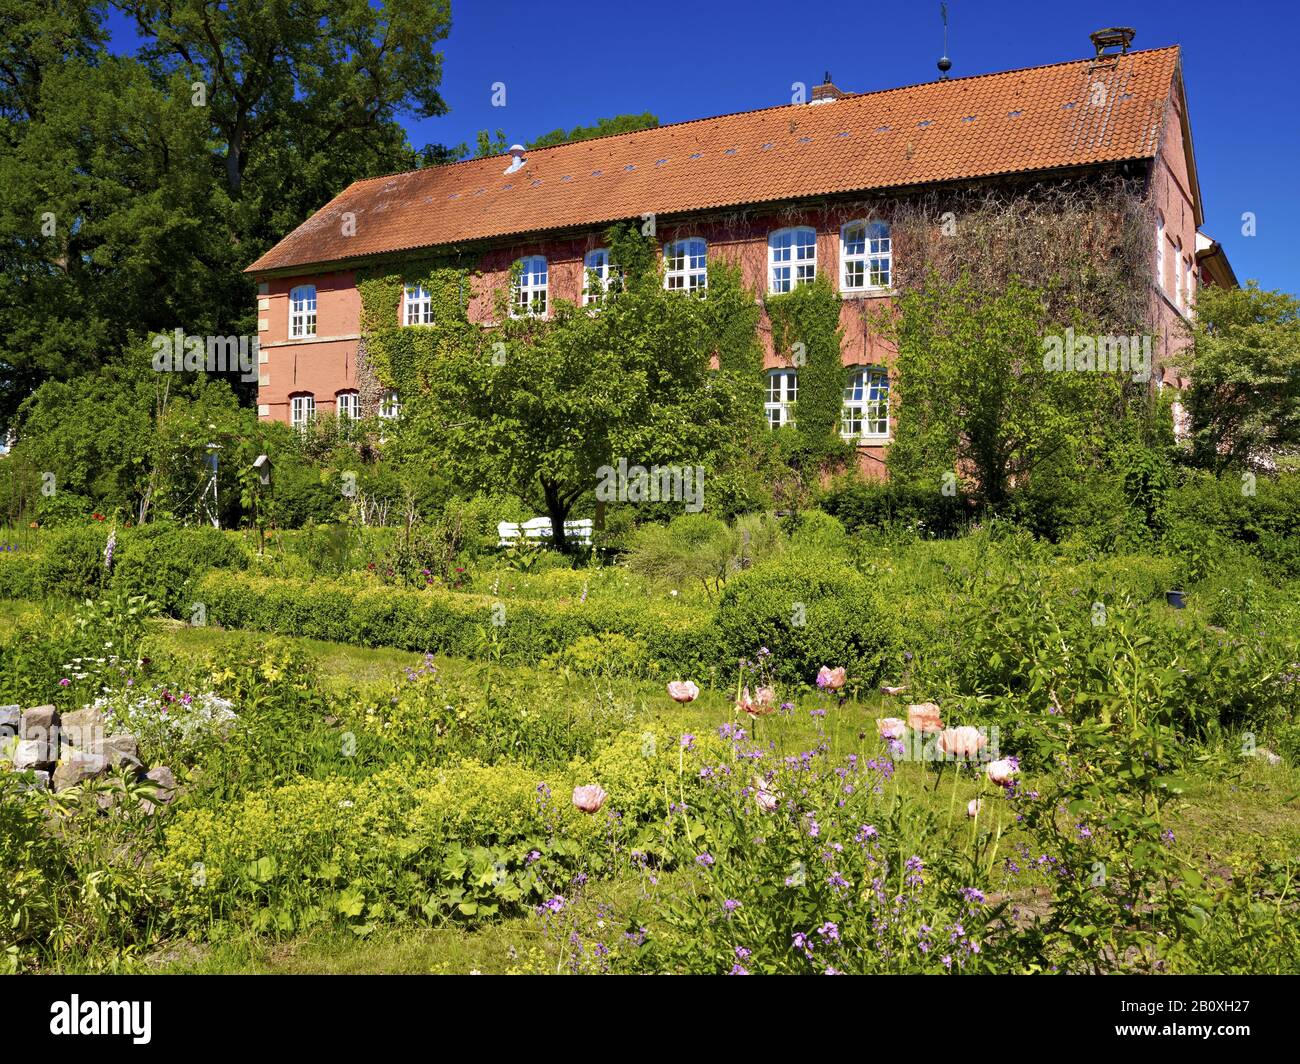 Garden of the district court in Ottersberg, district of Verden, Lower Saxony, Germany, Stock Photo